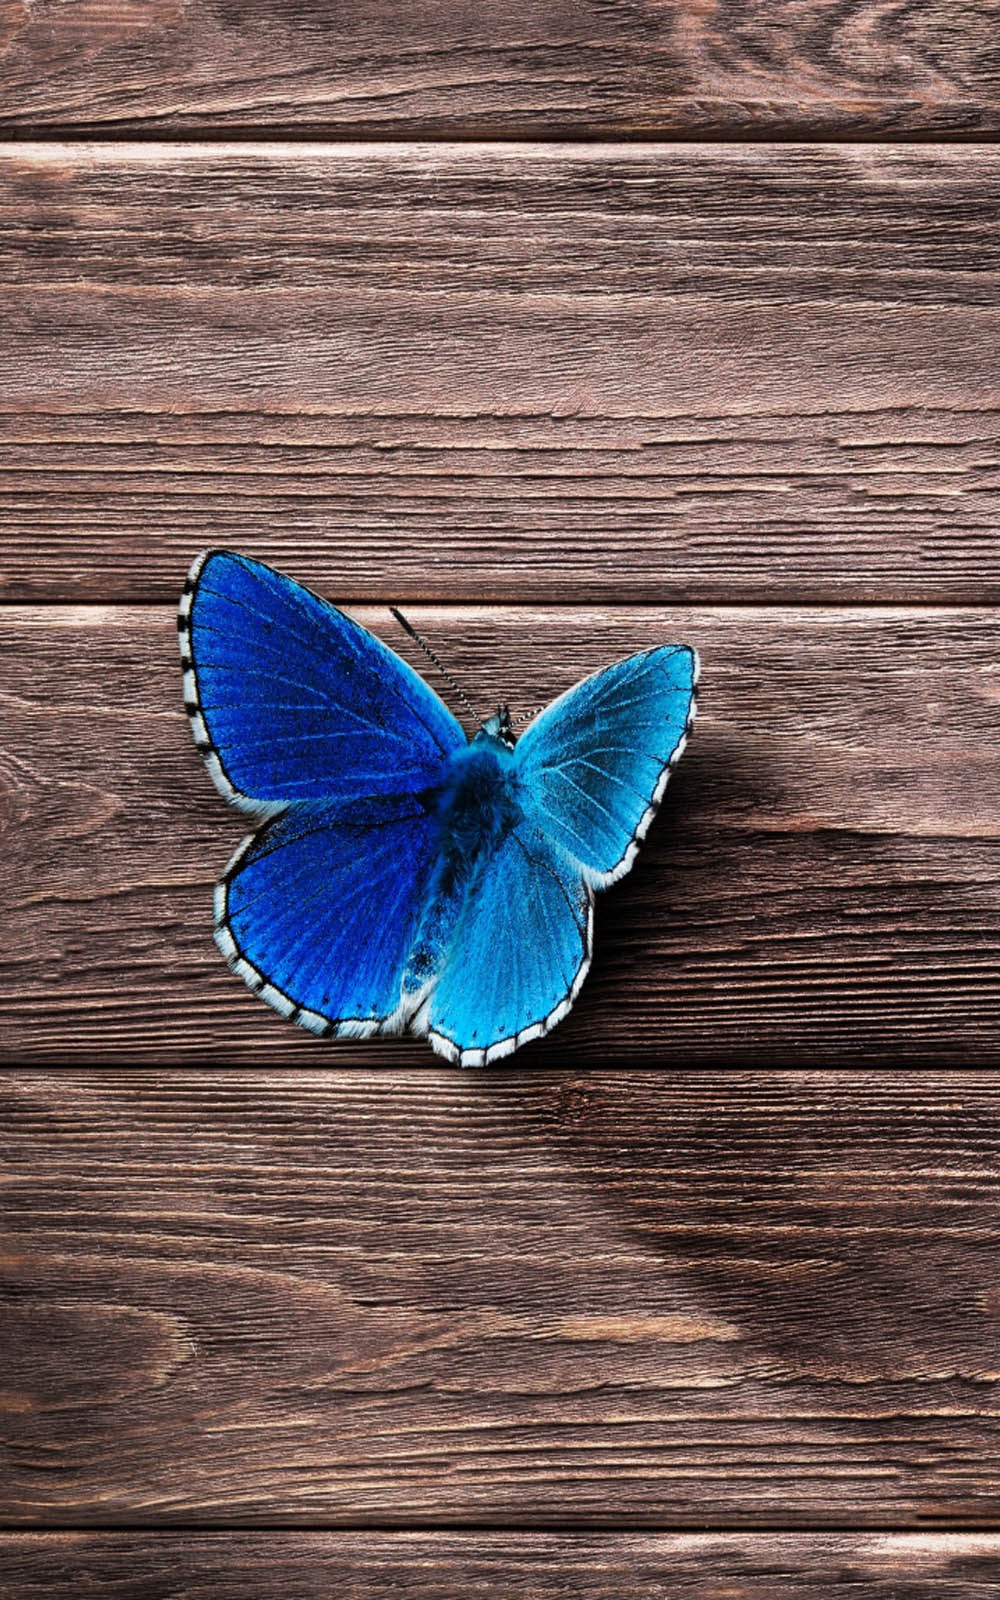 butterfly wallpaper mobile,butterfly,insect,blue,moths and butterflies,invertebrate